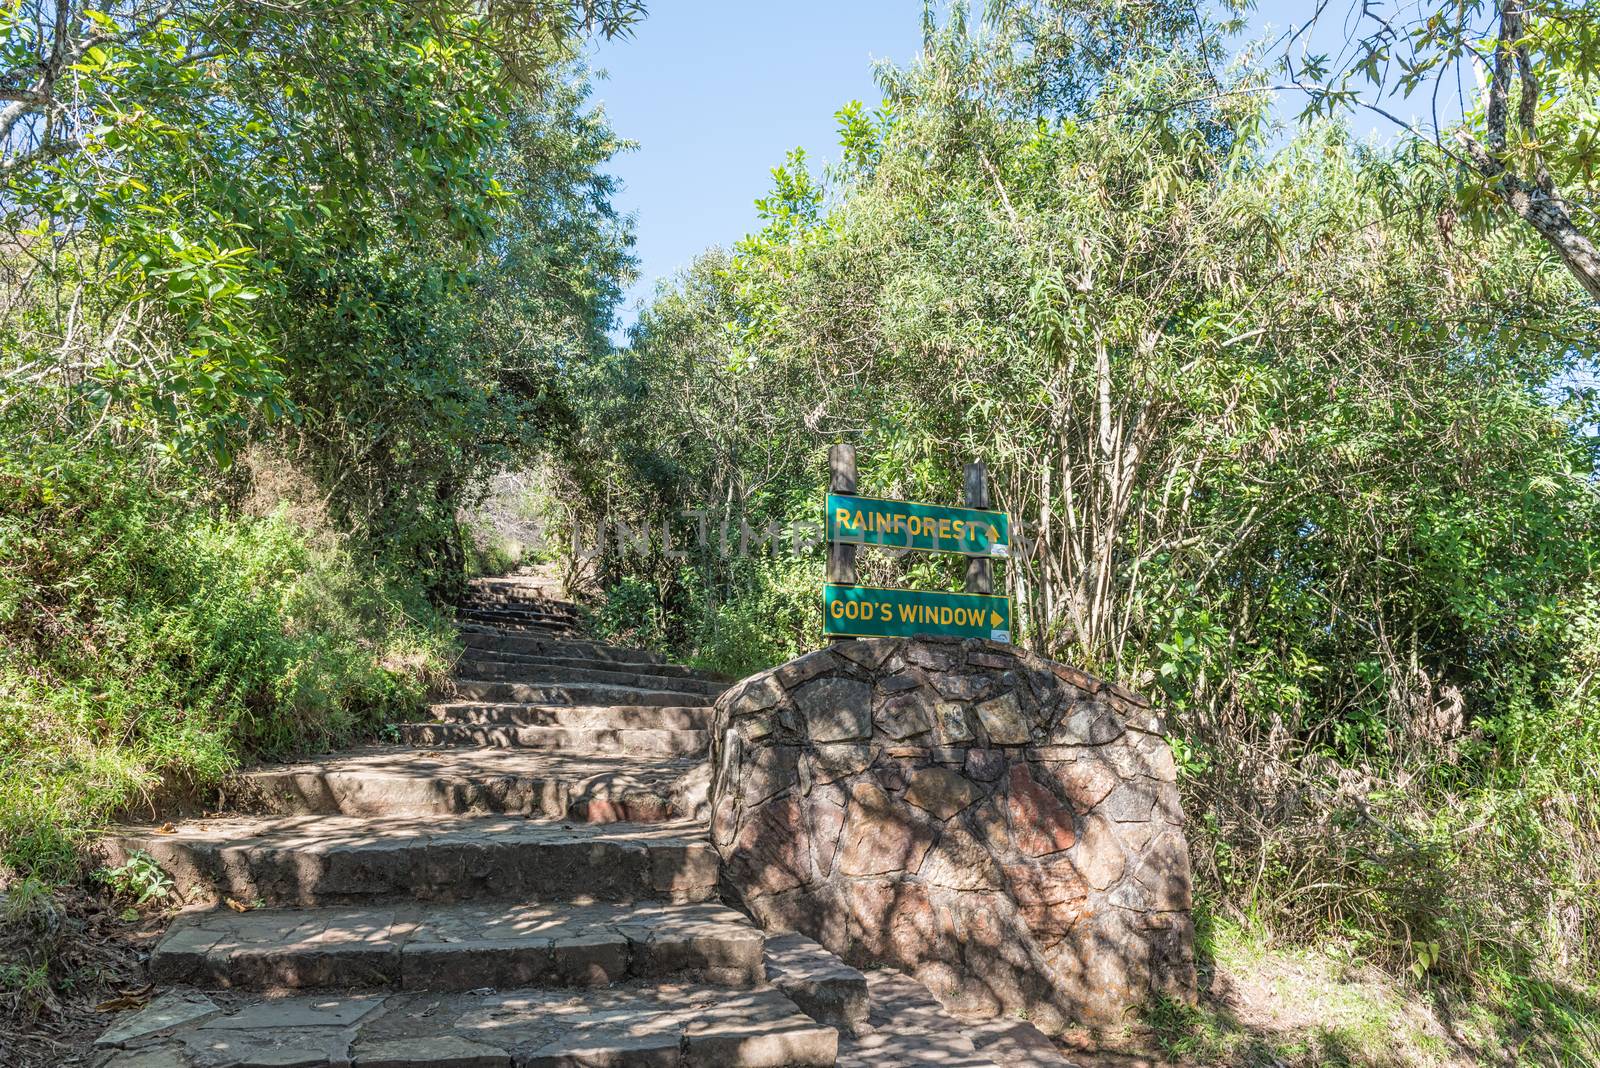 Stairs leading to the rainforest at Gods Window on road R534 near Graskop